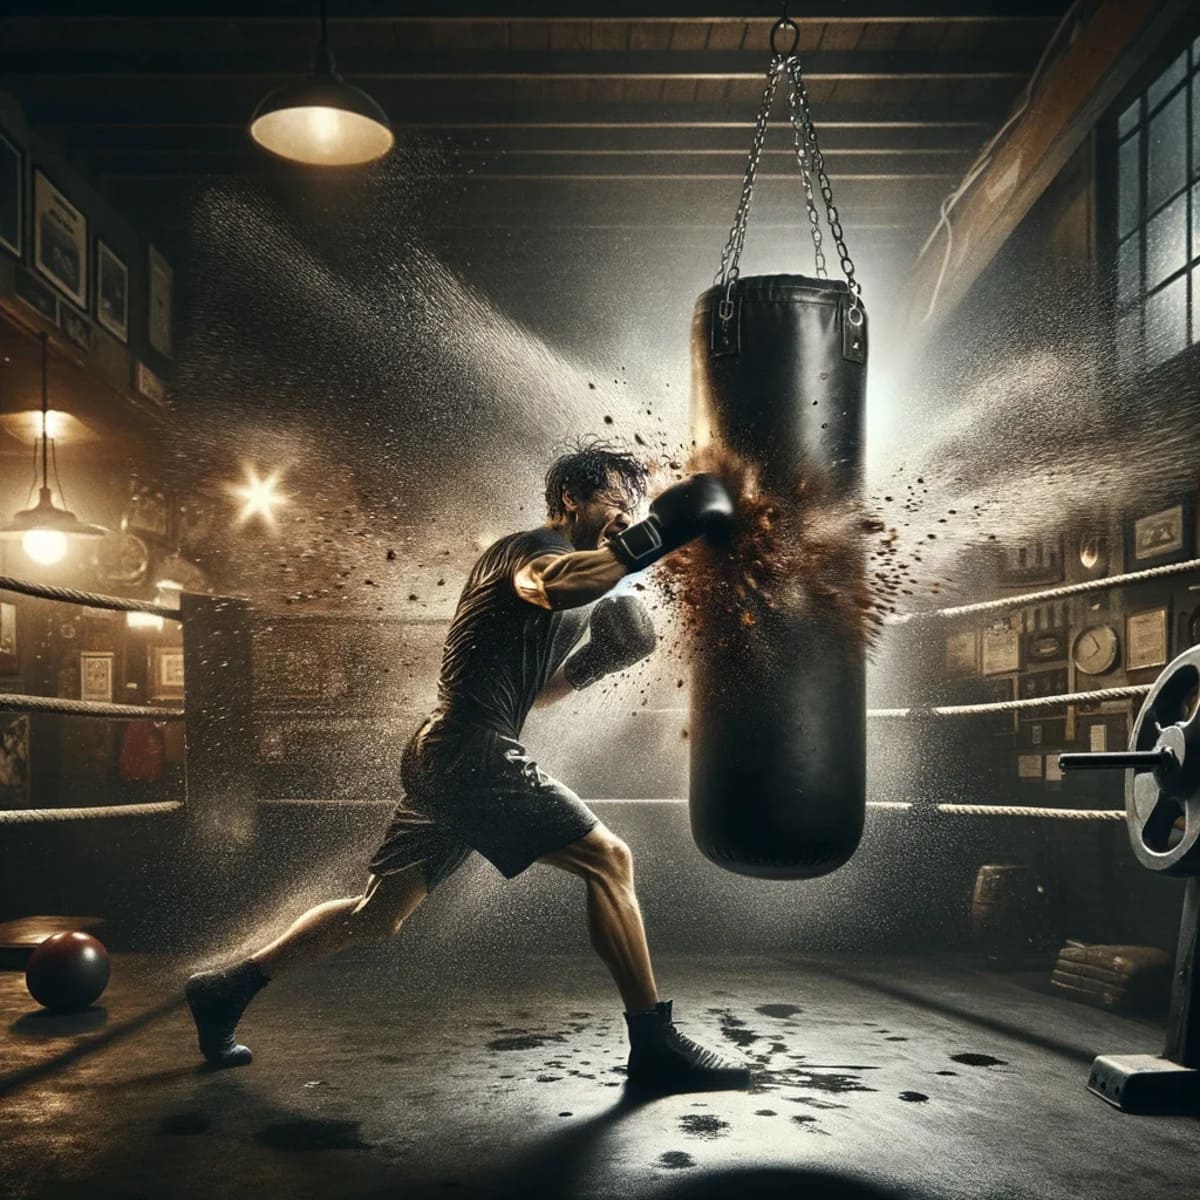 Boxer training with powerful punch on heavy bag in gritty gym.